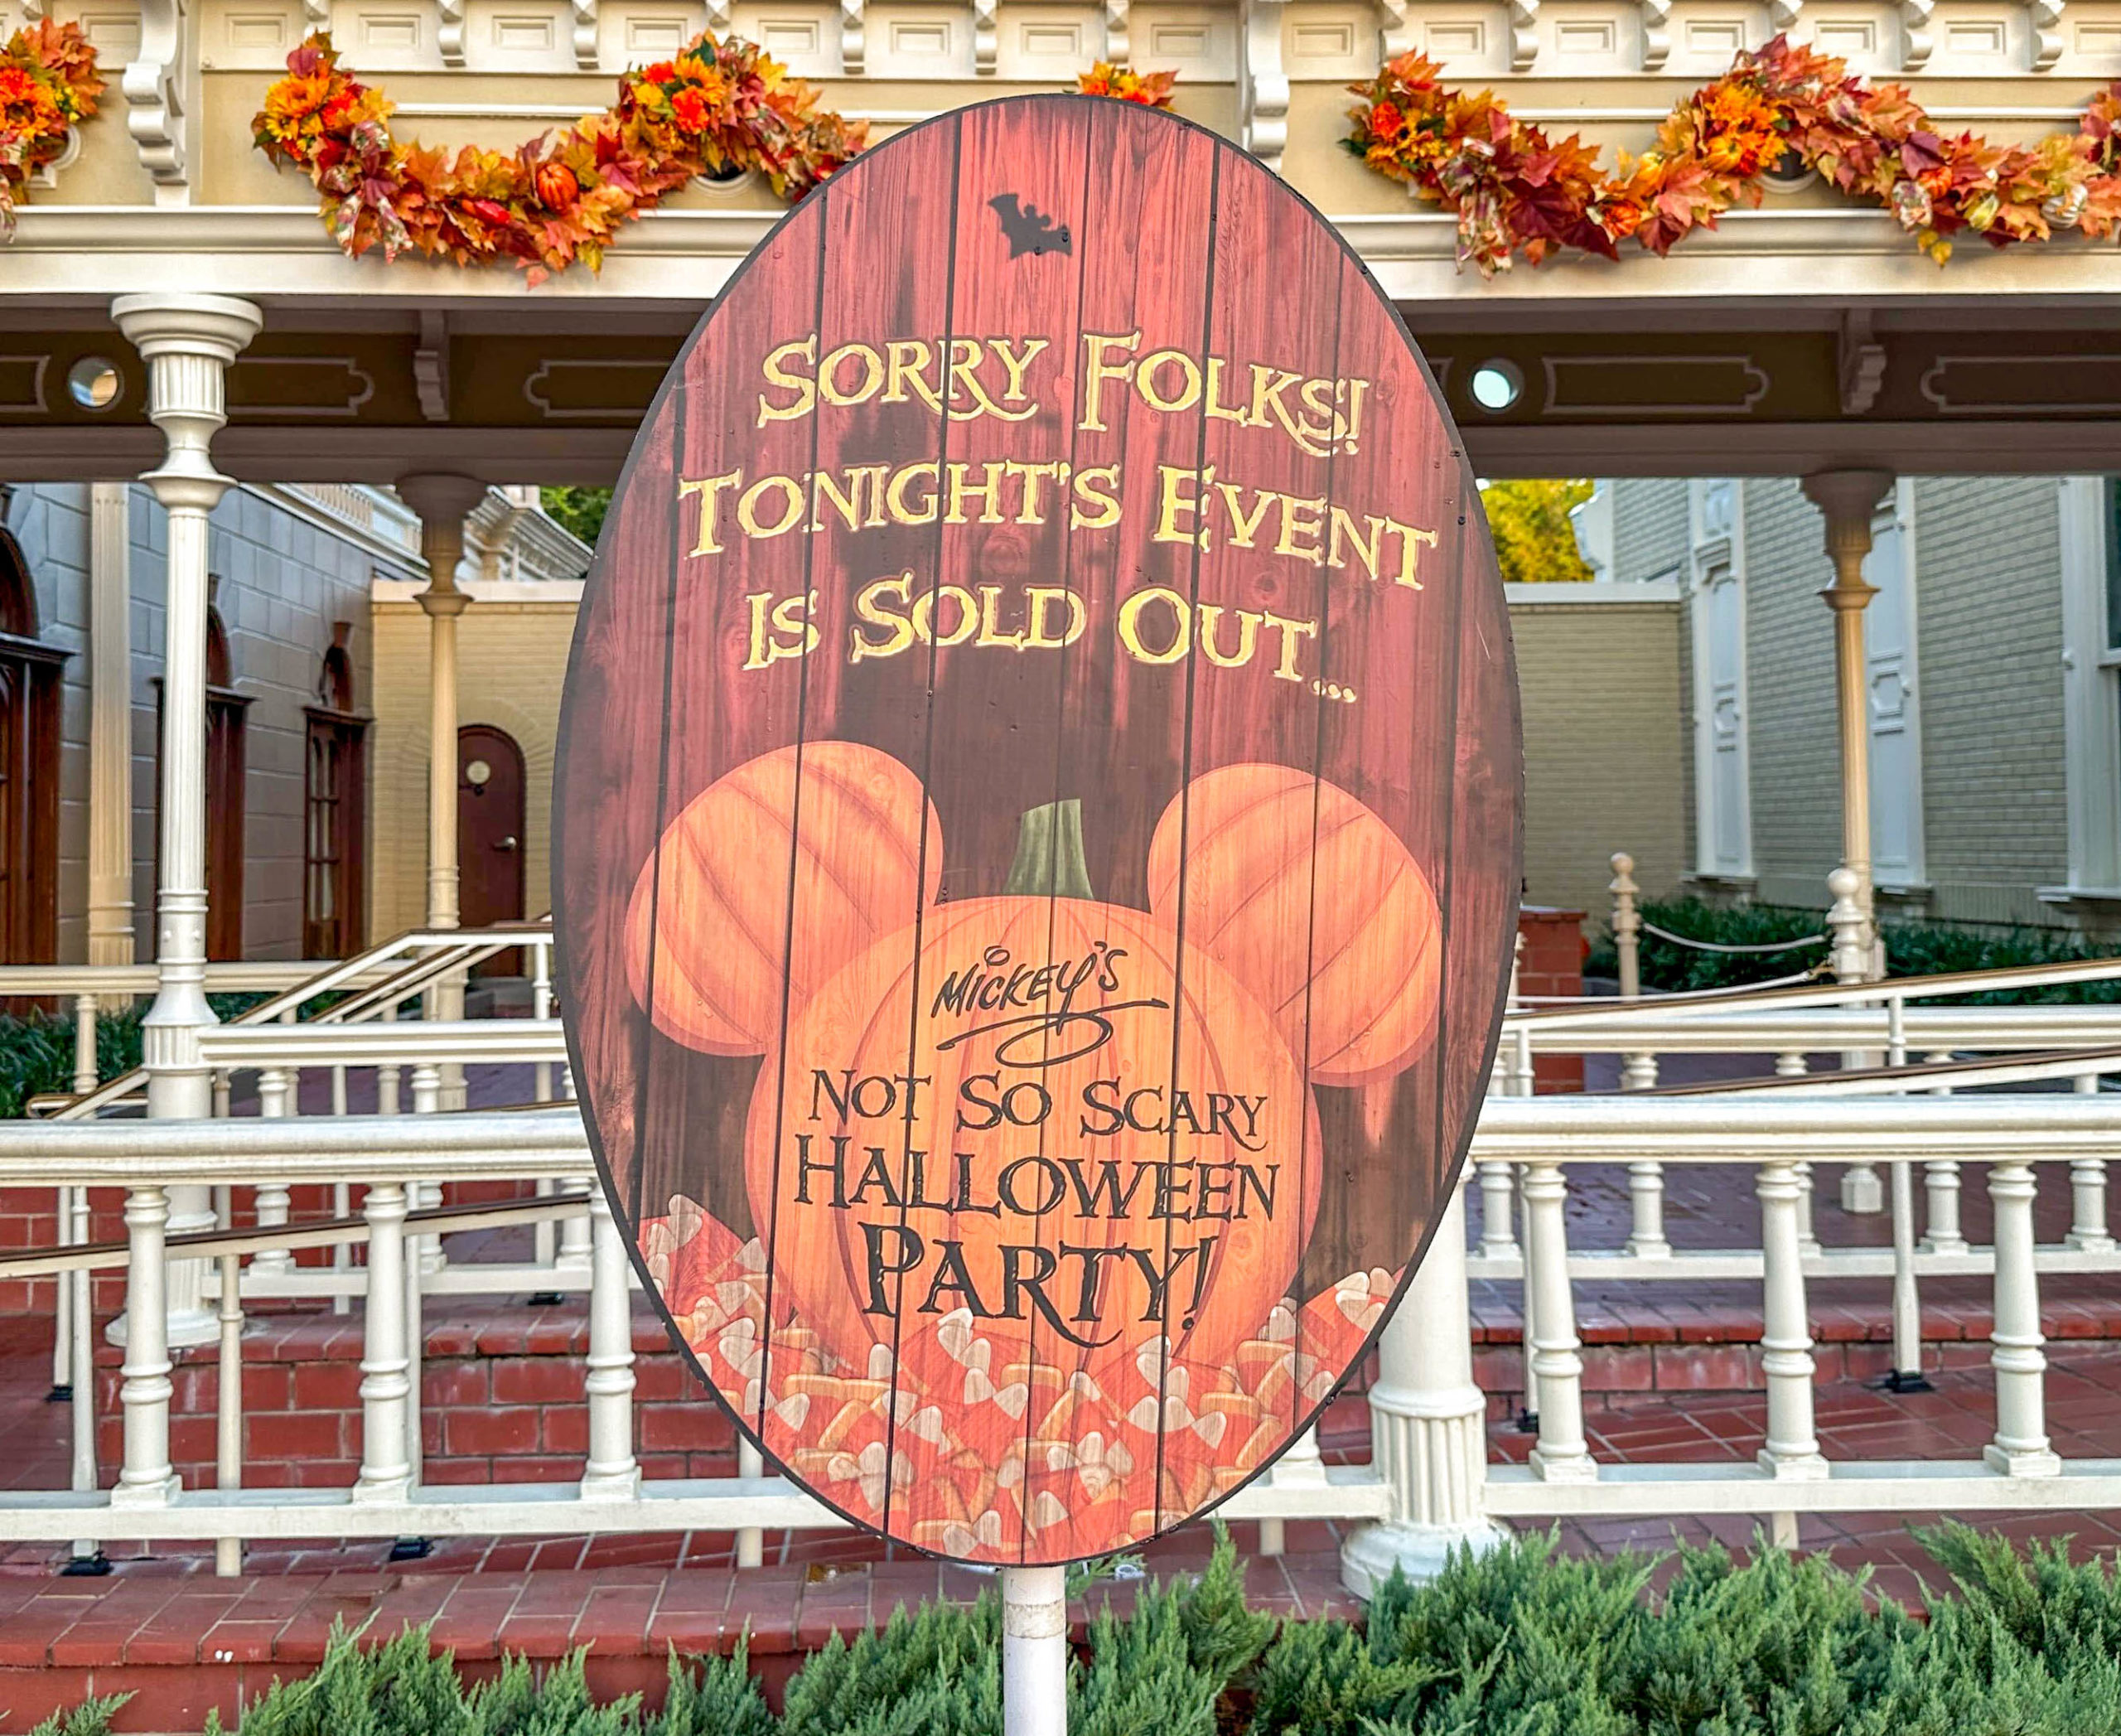 Mickey's Not-So-Scary Halloween Party tickets sold out in 2023